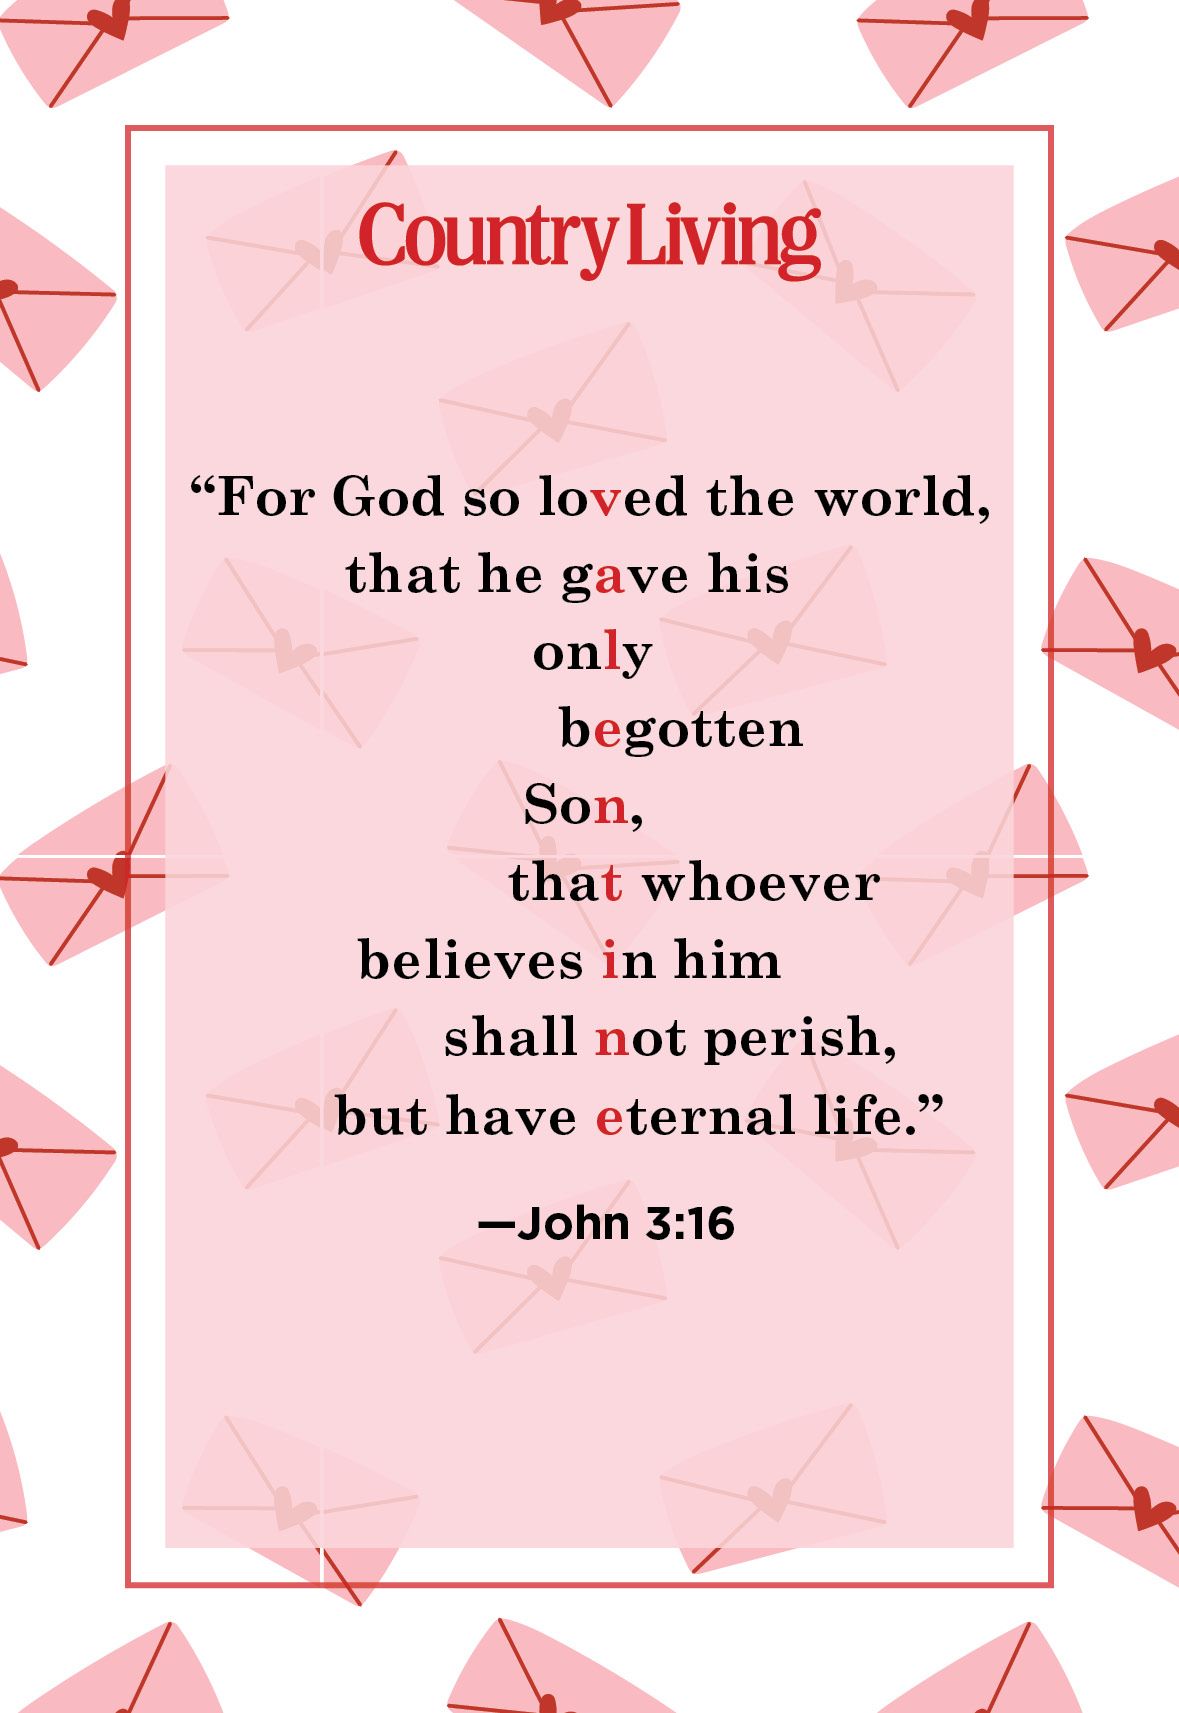 Five Bible Verses About Love for Valentine's Day - Bible Gateway Blog